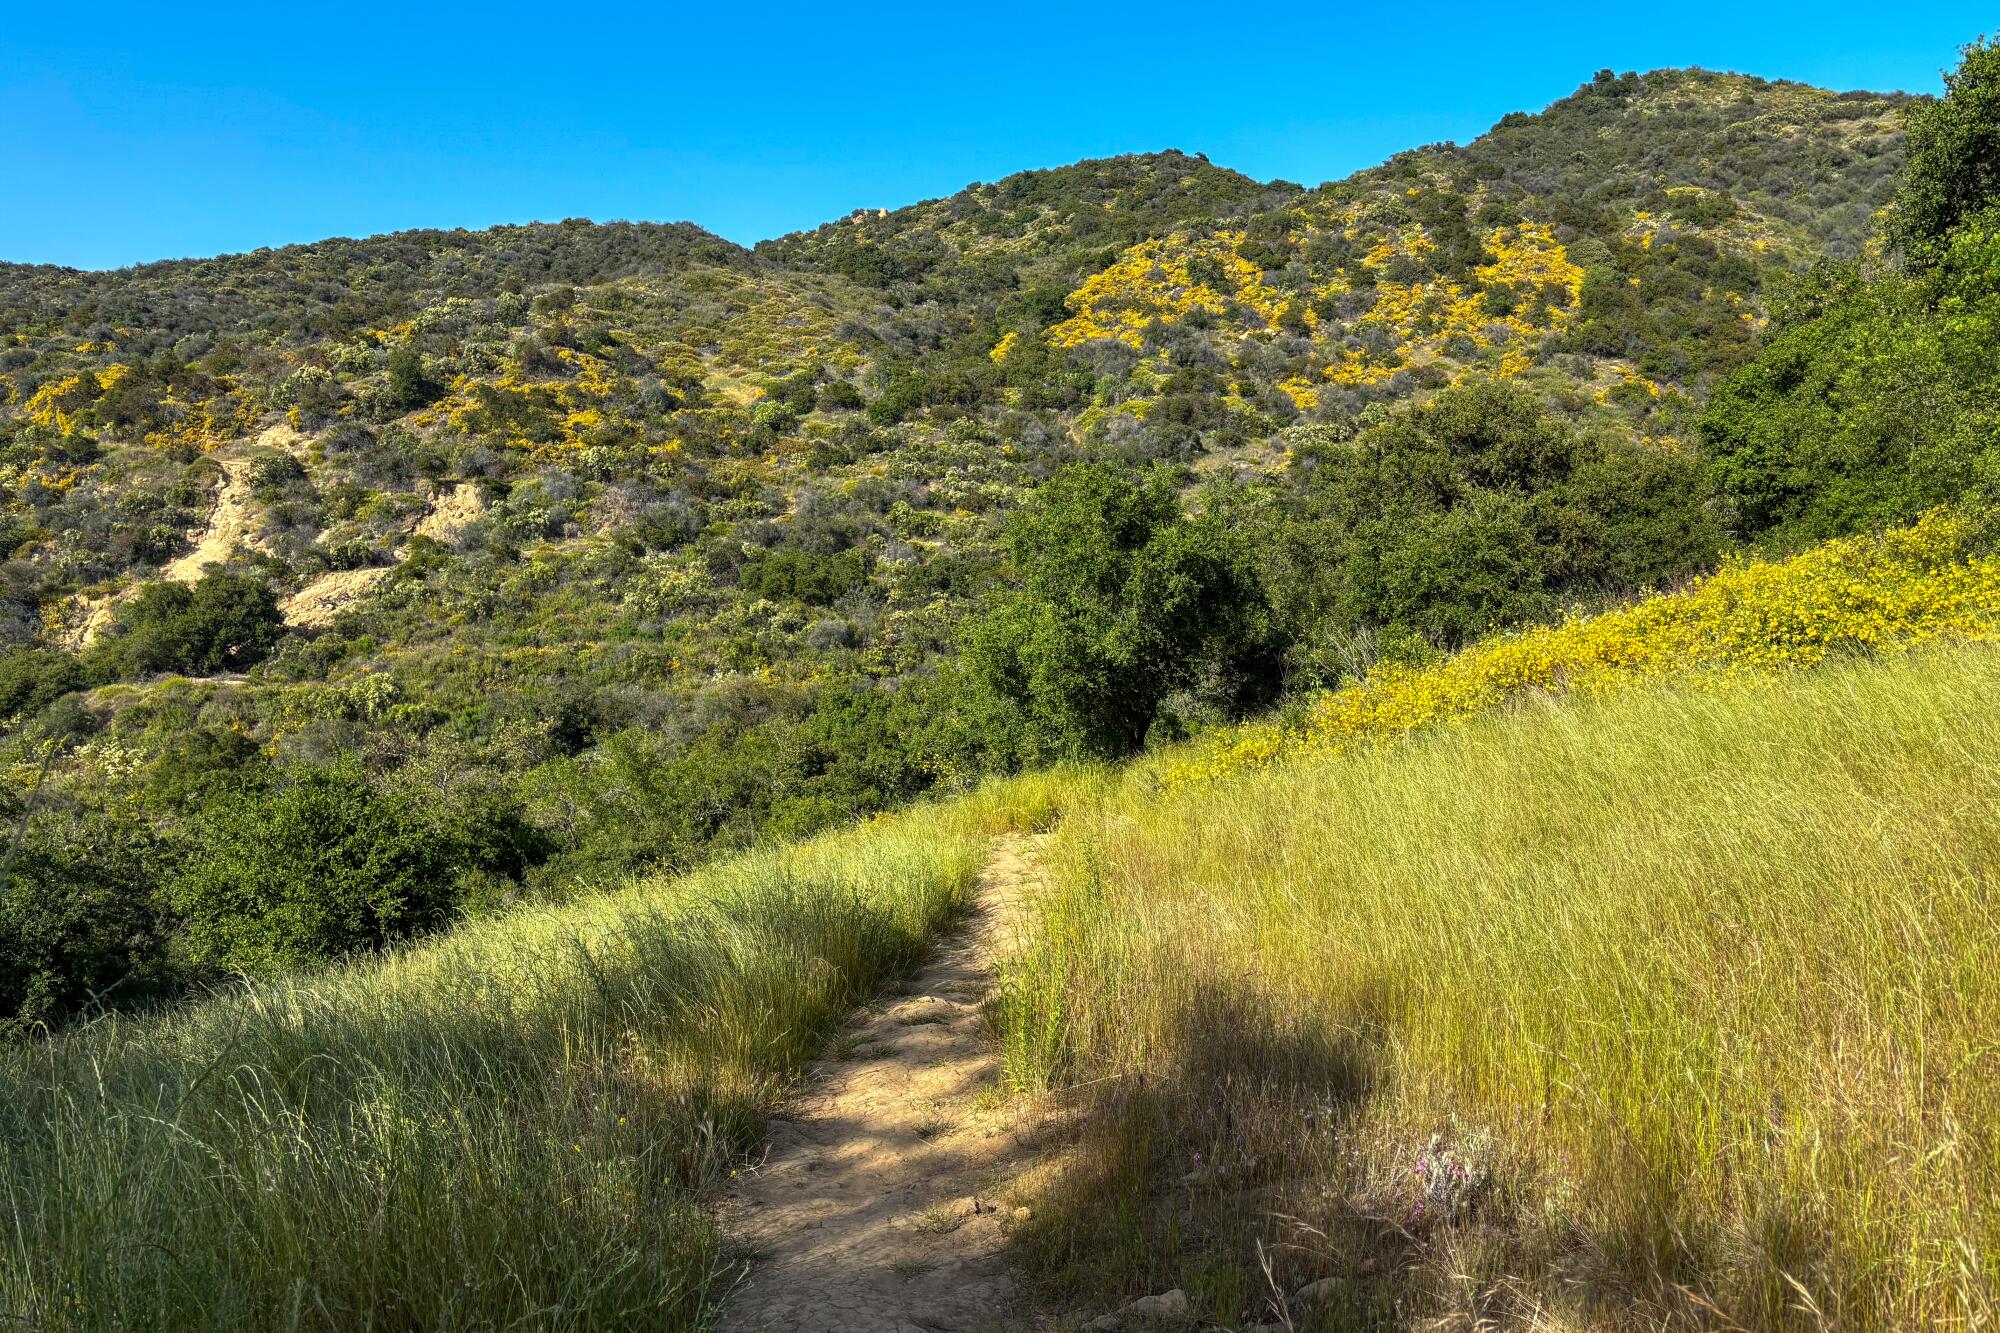 A narrow dirt path surrounded by grasses and wildflowers with a hillside dappled with monkey flower in the distance